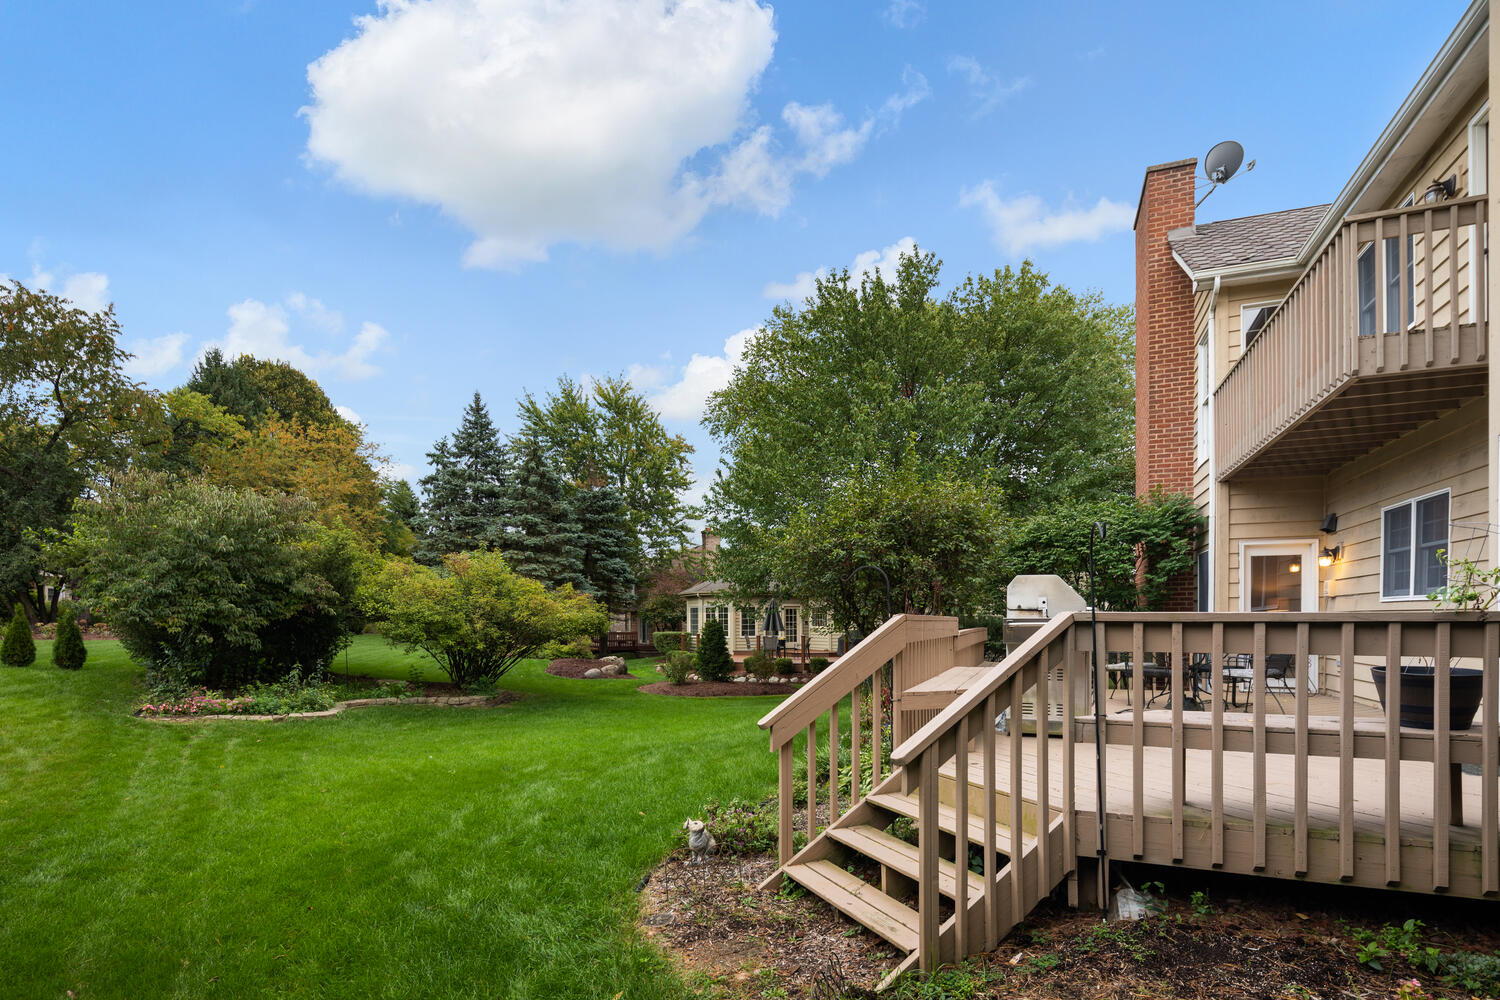  654 Chesterfield Ave, Naperville, IL 60540, US Photo 11